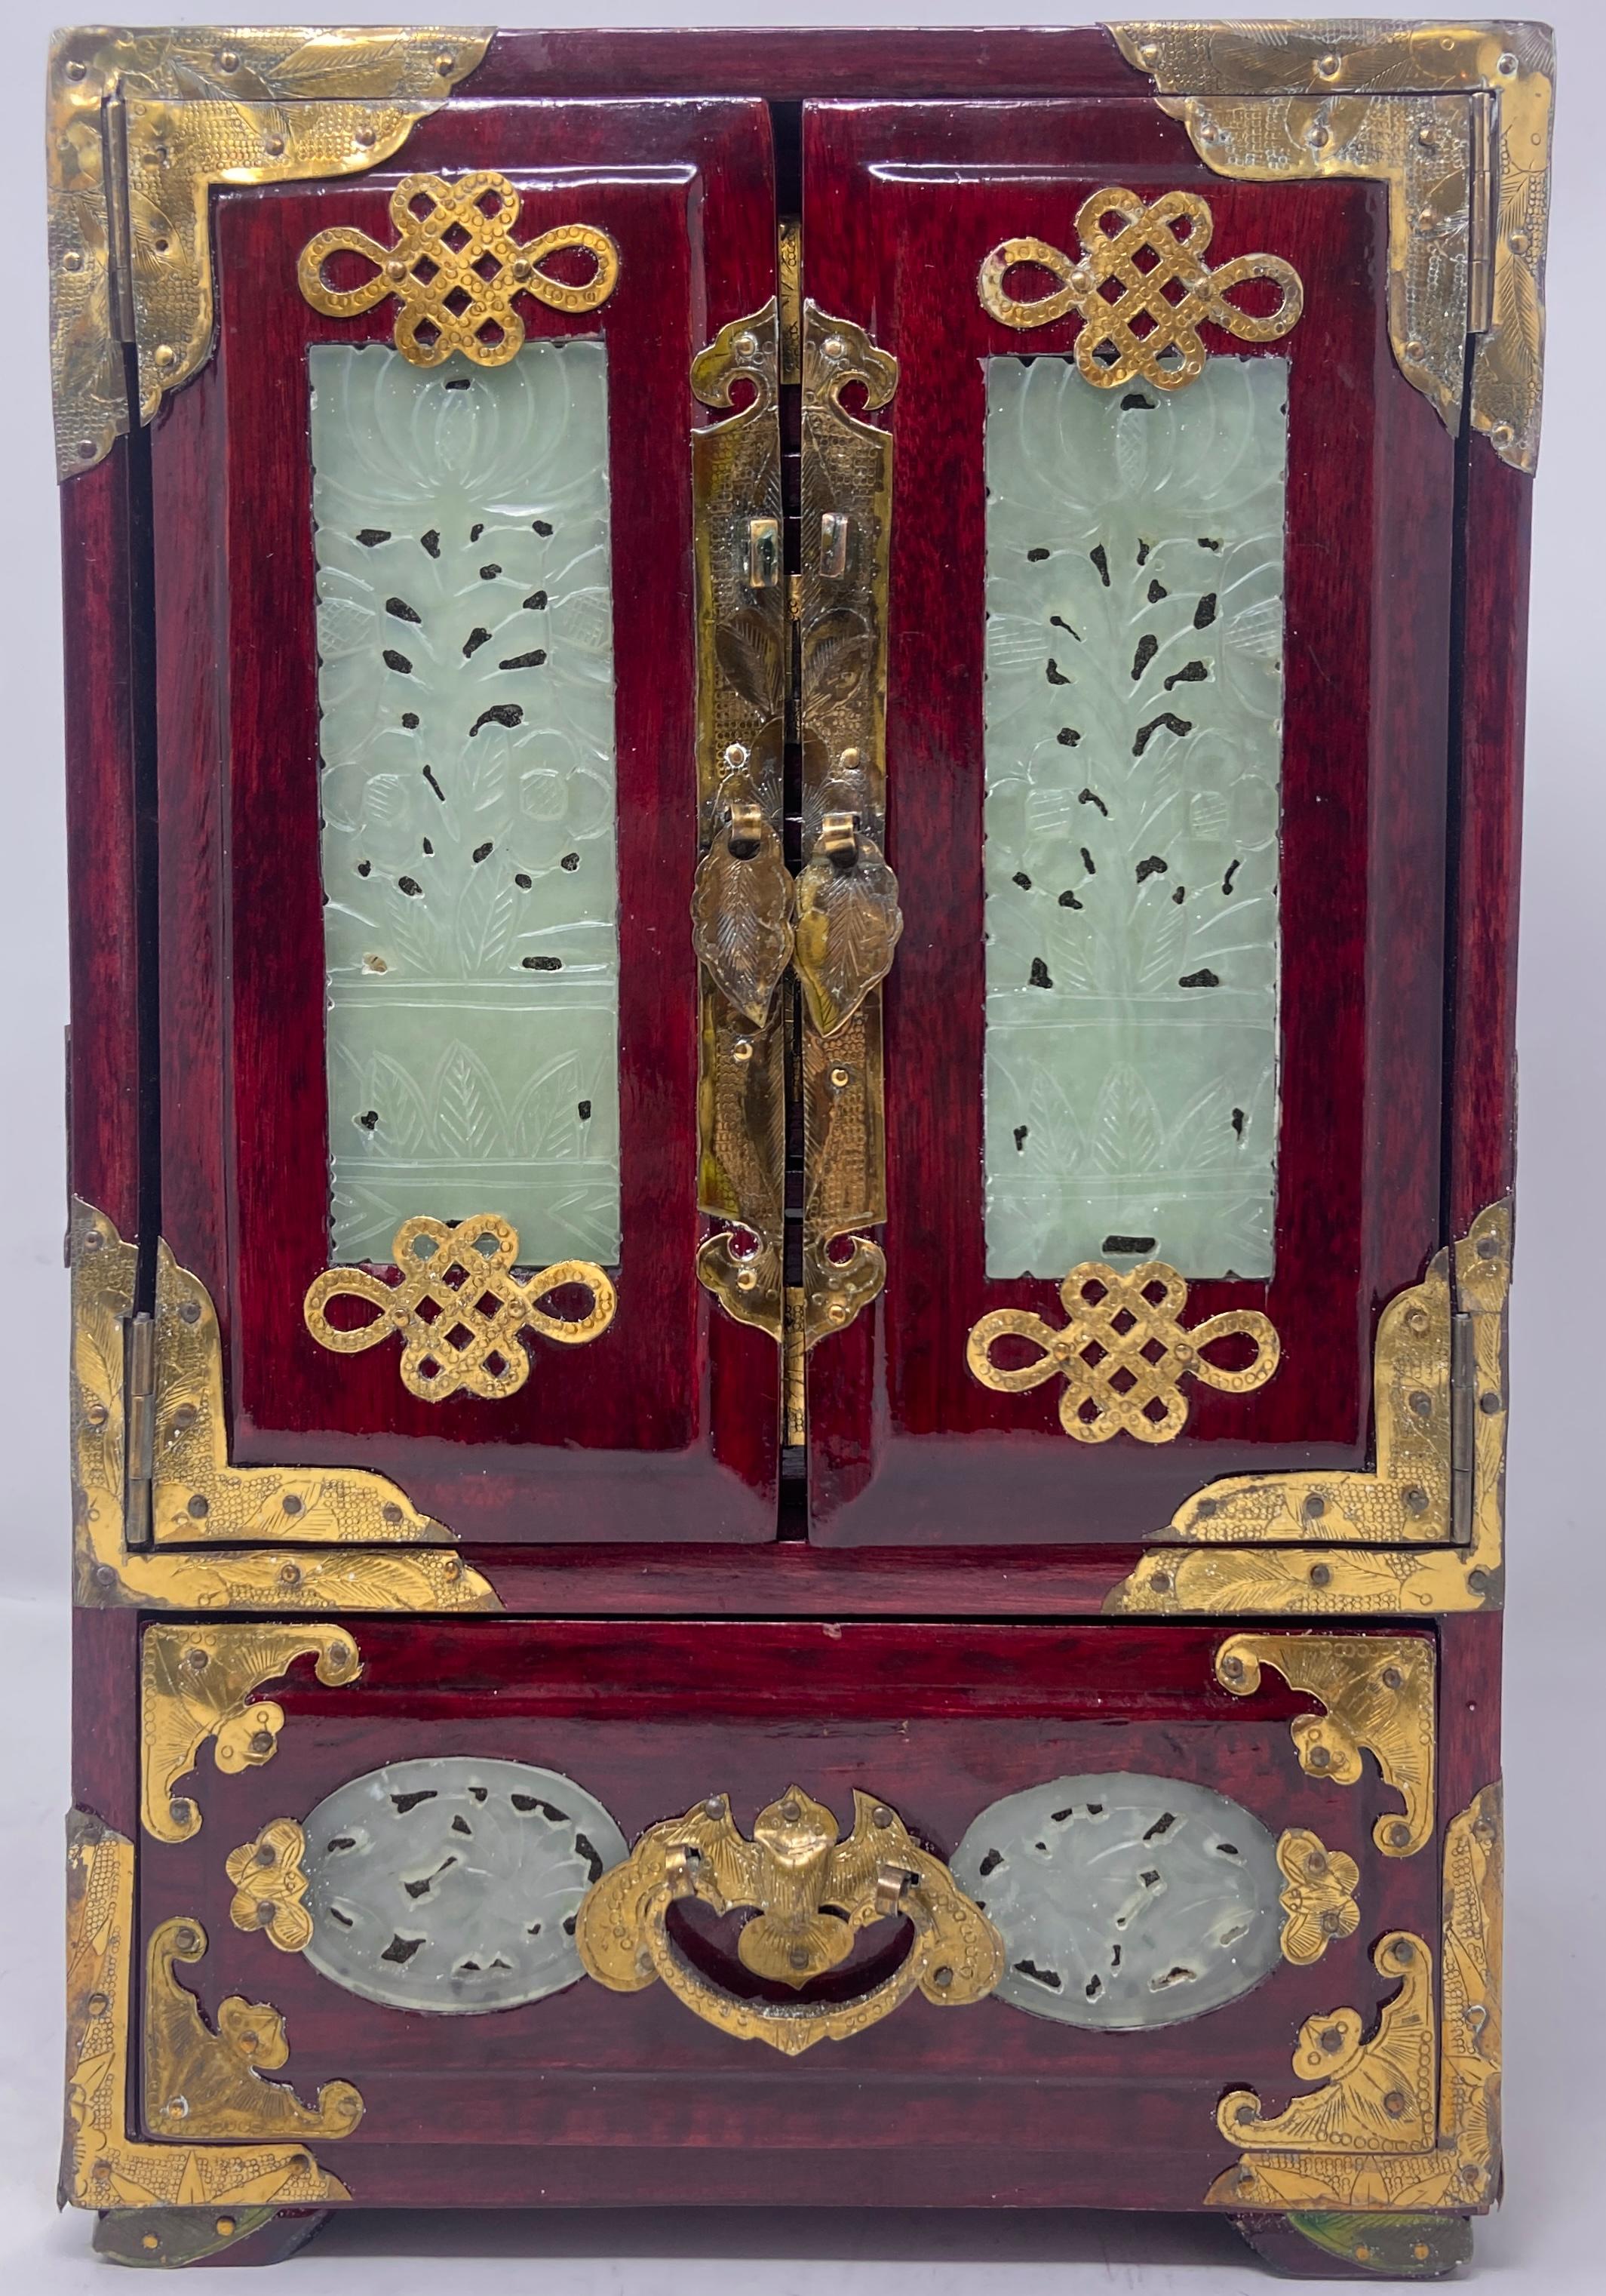 Antique Chinese Brass-Mounted Red Lacquer Mahjong Set with Jade Inlay, Circa 1900-1920.